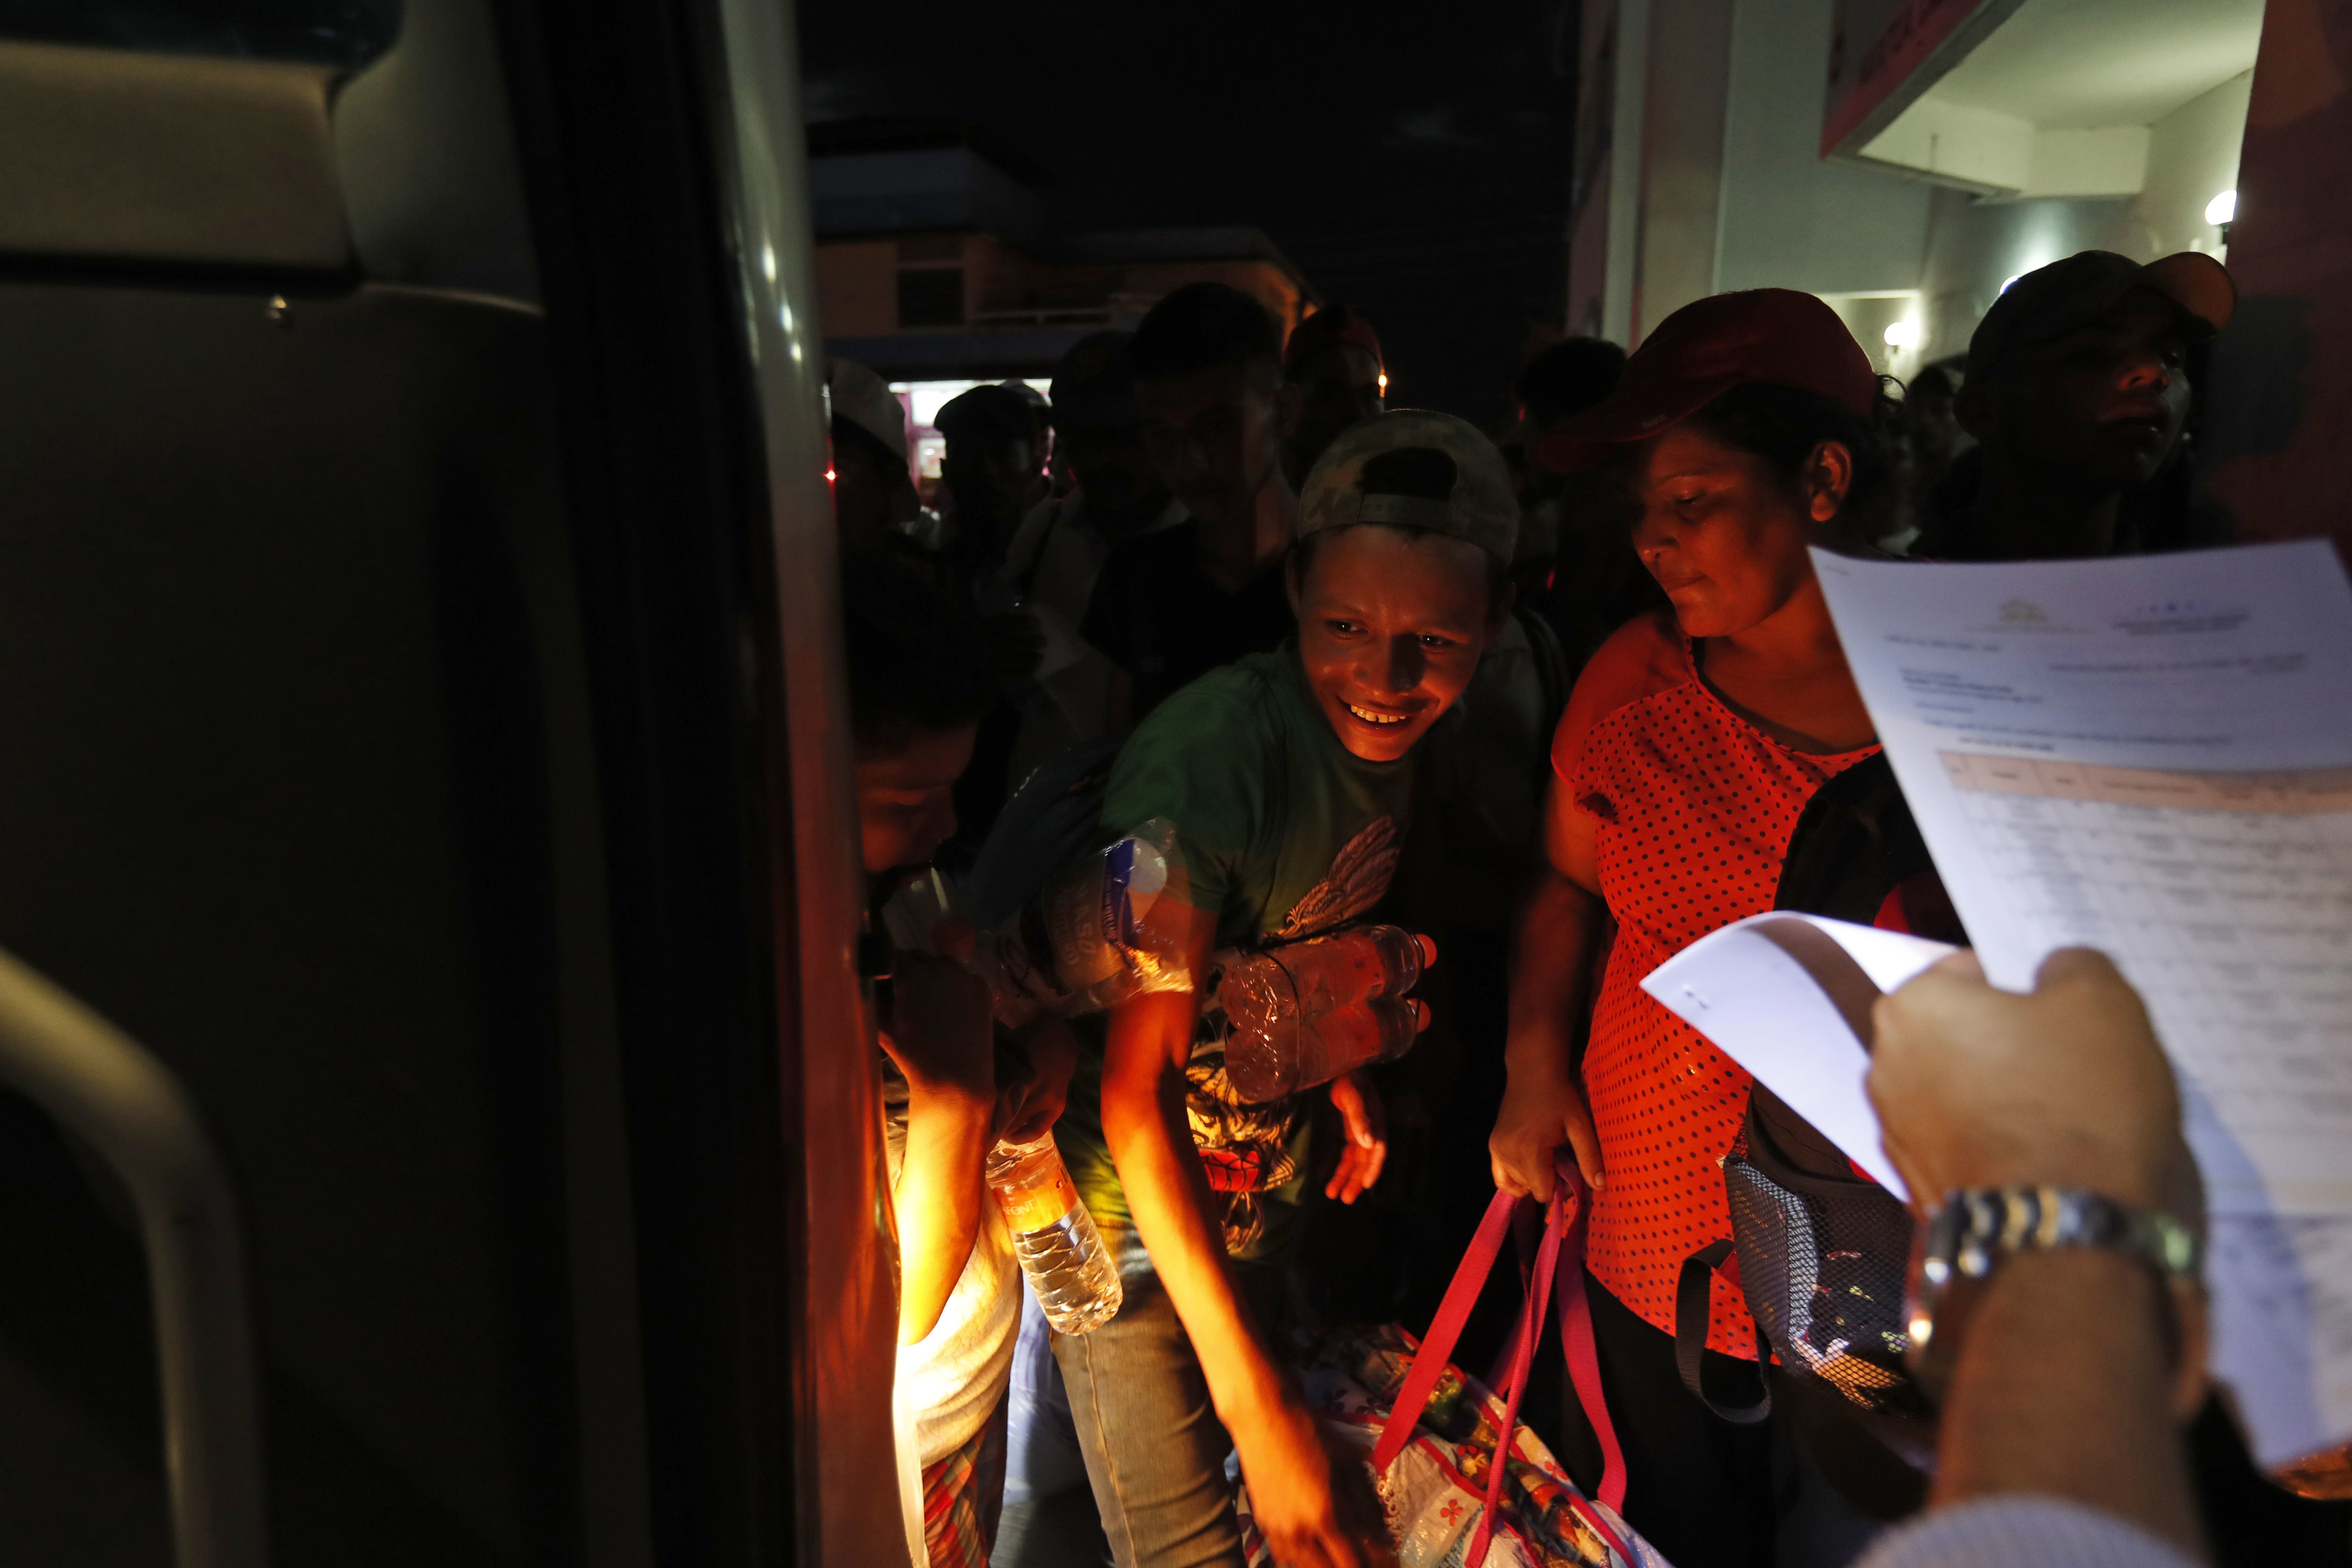 Honduran migrants board a bus at the service of the Mexican National Migration Institute to voluntarily return to their home country, in Huixtla, Mexico, Wednesday, Oct. 24, 2018. LIttle by little, sickness, fear and police harassment are whittling down the migrant caravan making its way through southern Mexico to the U.S. border. (AP Photo/Moises Castillo)